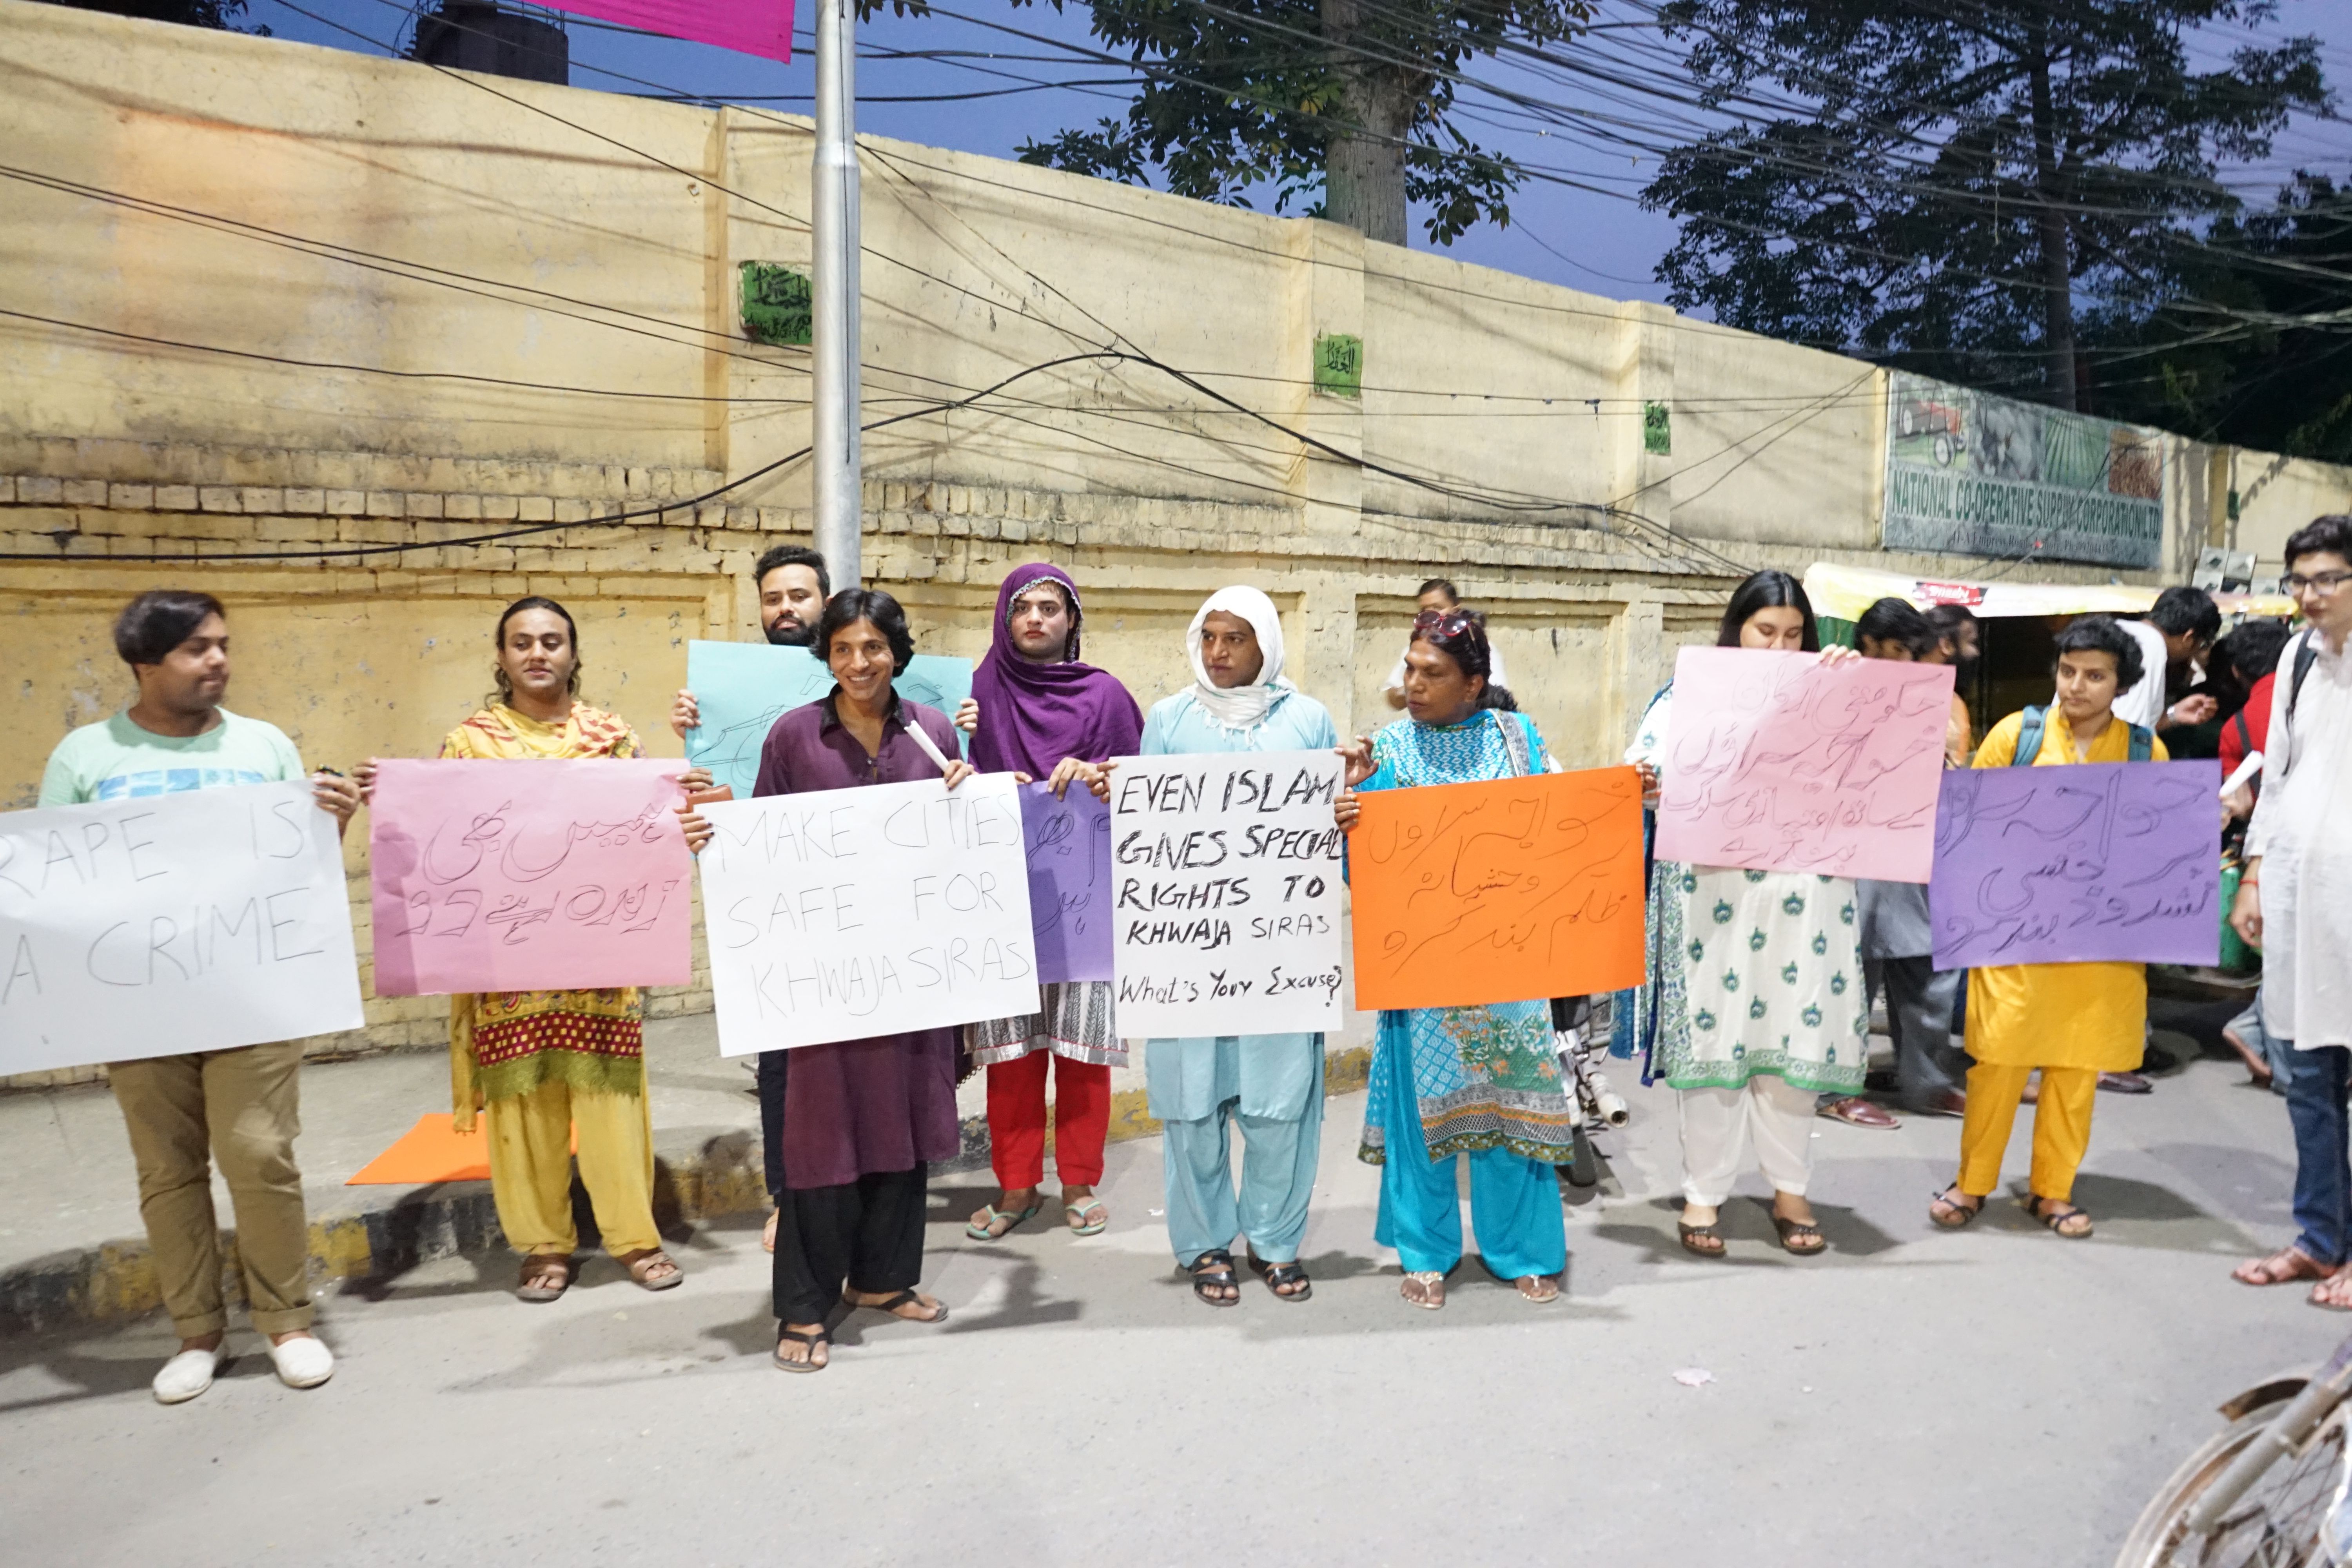 This protest in Lahore was one of many that took place in cities across Pakistan on August 2 against the gang rape of two khawaja siras. The orange sign reads, "Stop the torture and violence against khawaja siras." (The other signs are translated in previous photos). Image by Ikra Javed. Pakistan, 2016.